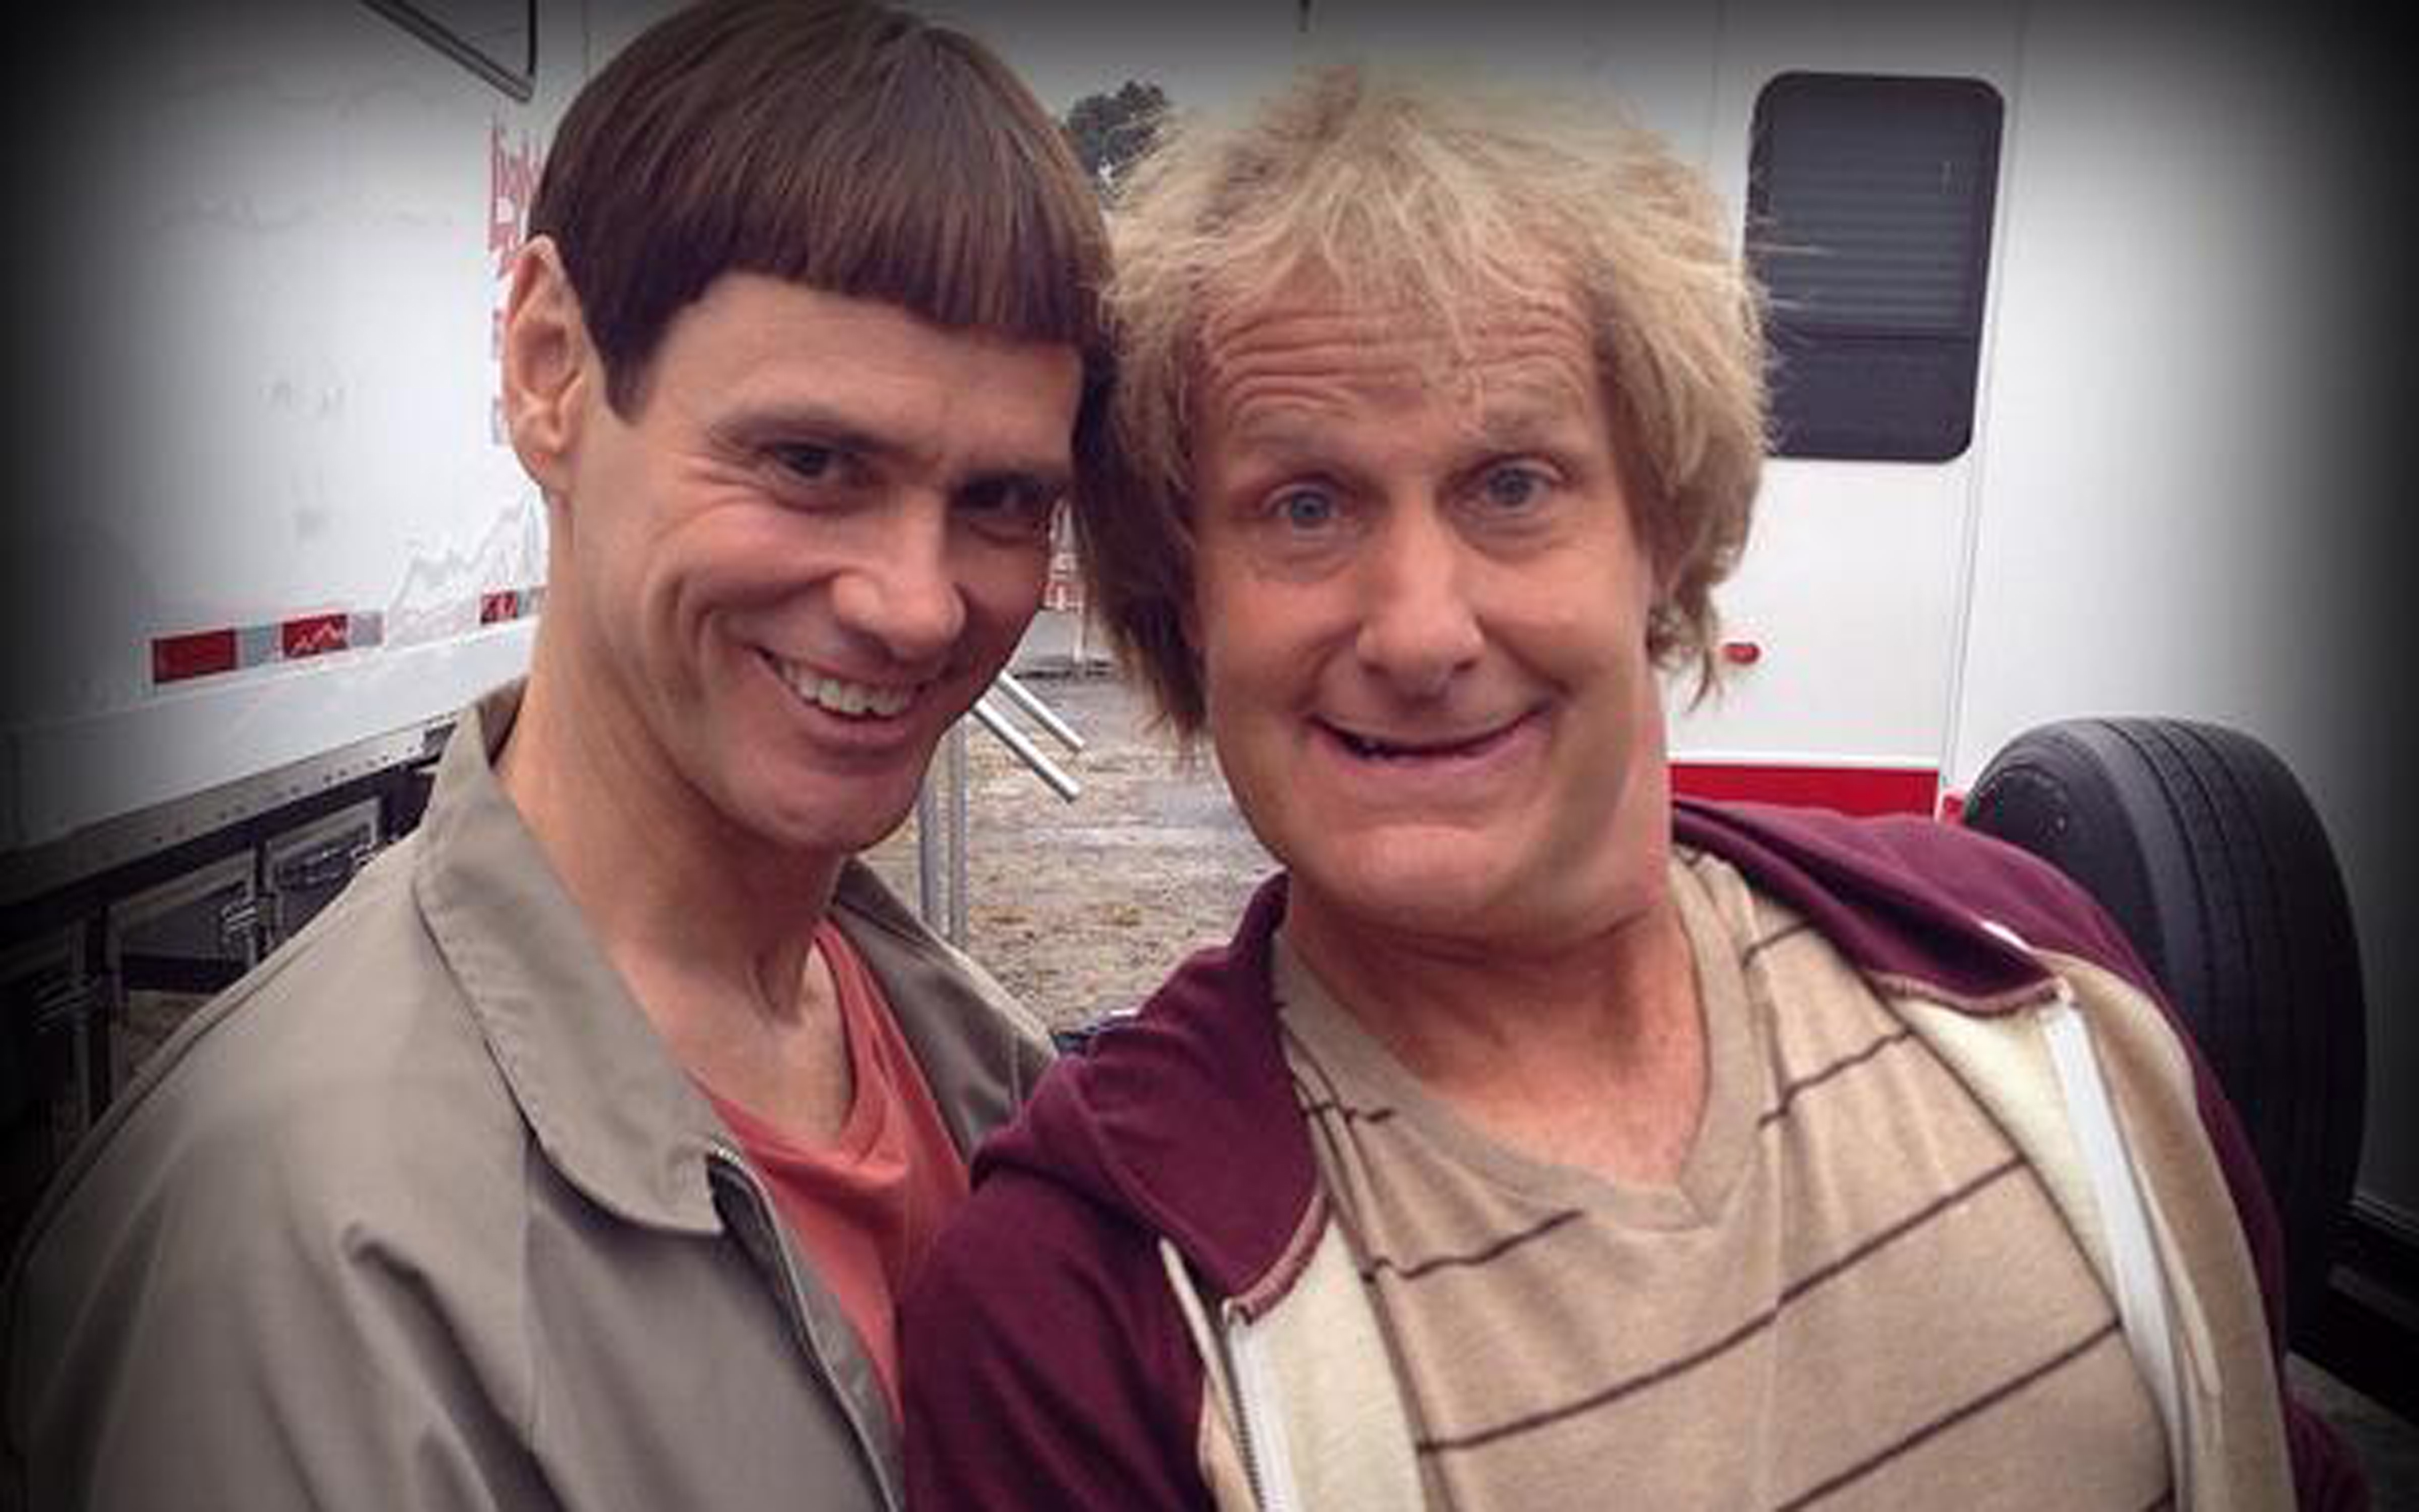 Dum and dumber in hindi hd